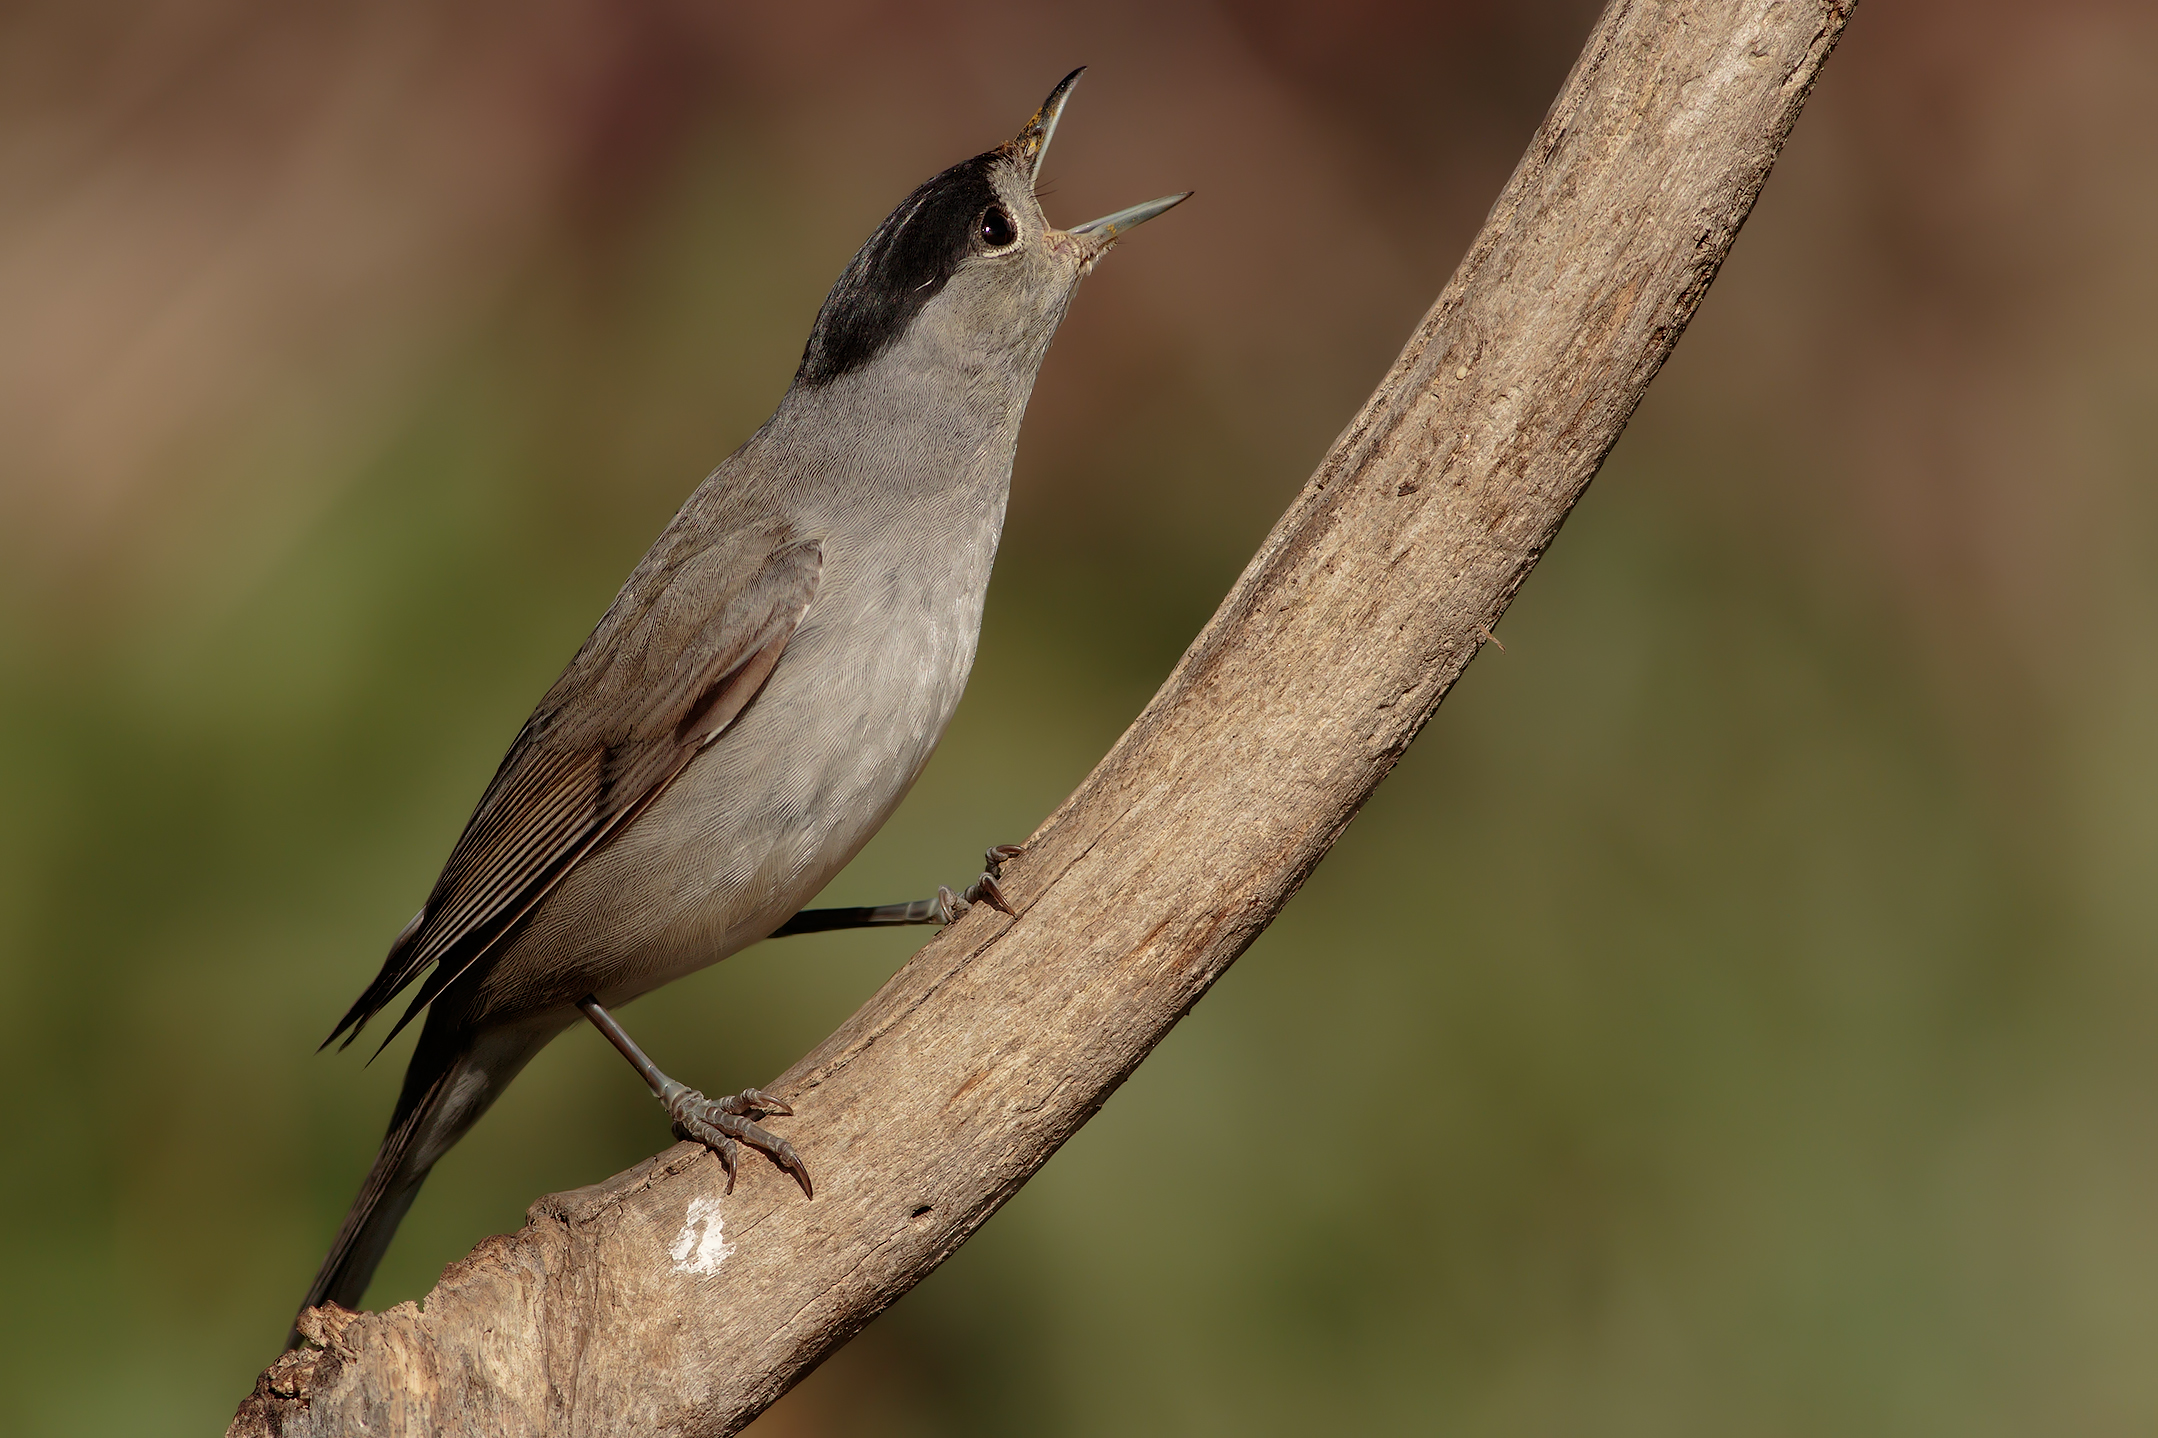 The song of the Blackcap...